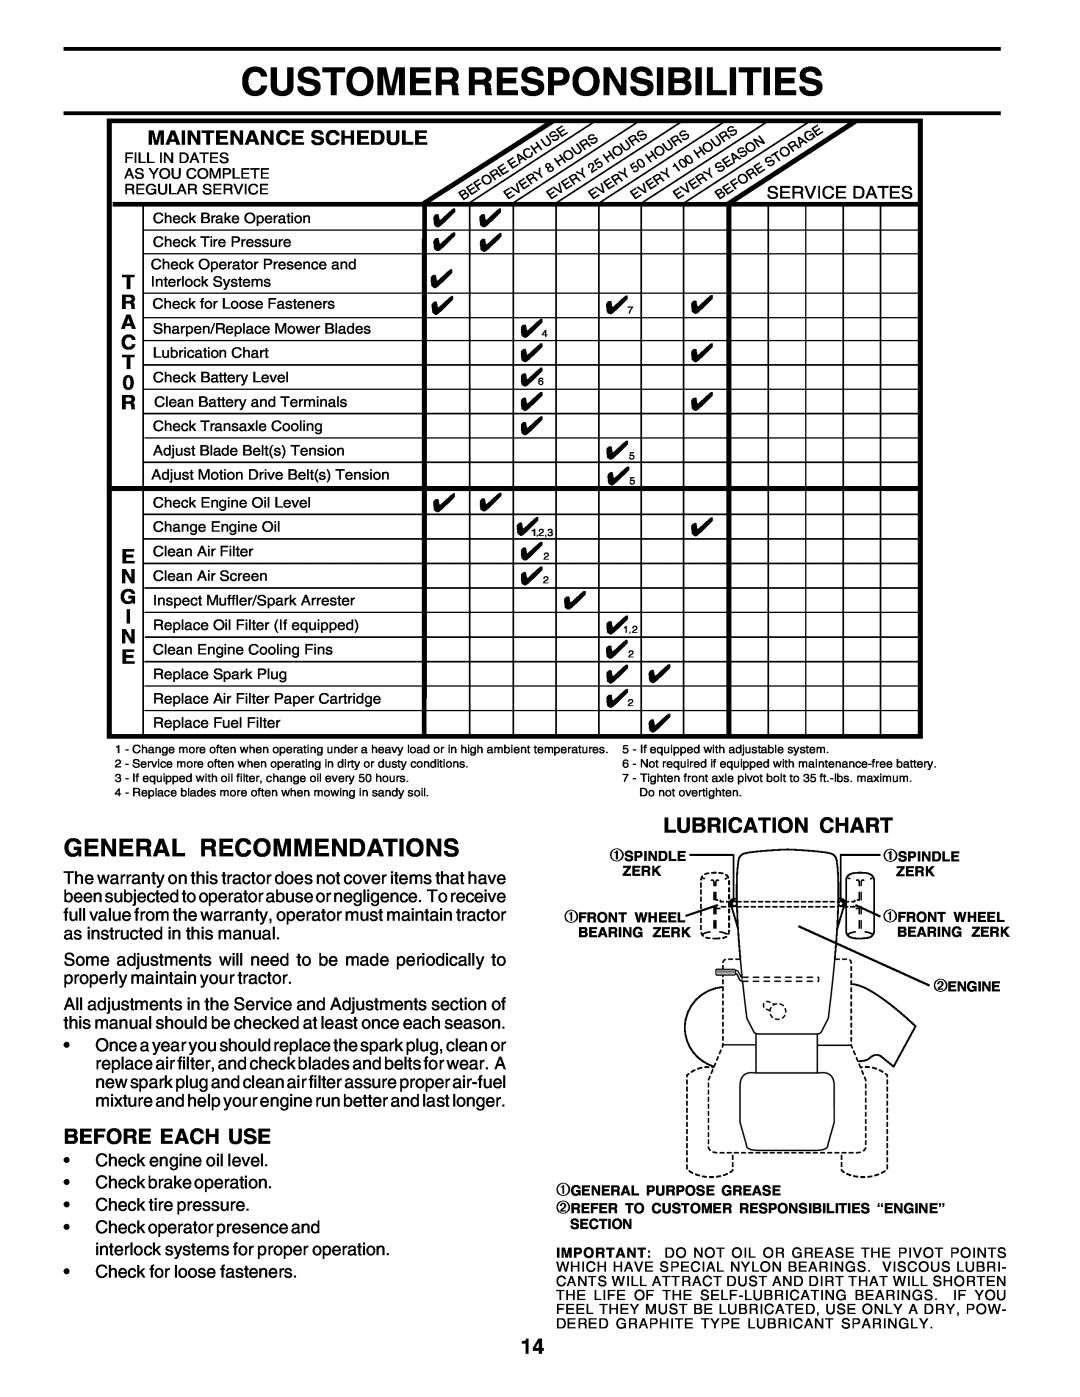 Weed Eater 180530 manual Customer Responsibilities, General Recommendations, Before Each Use, ¿ Lubrication Chart 